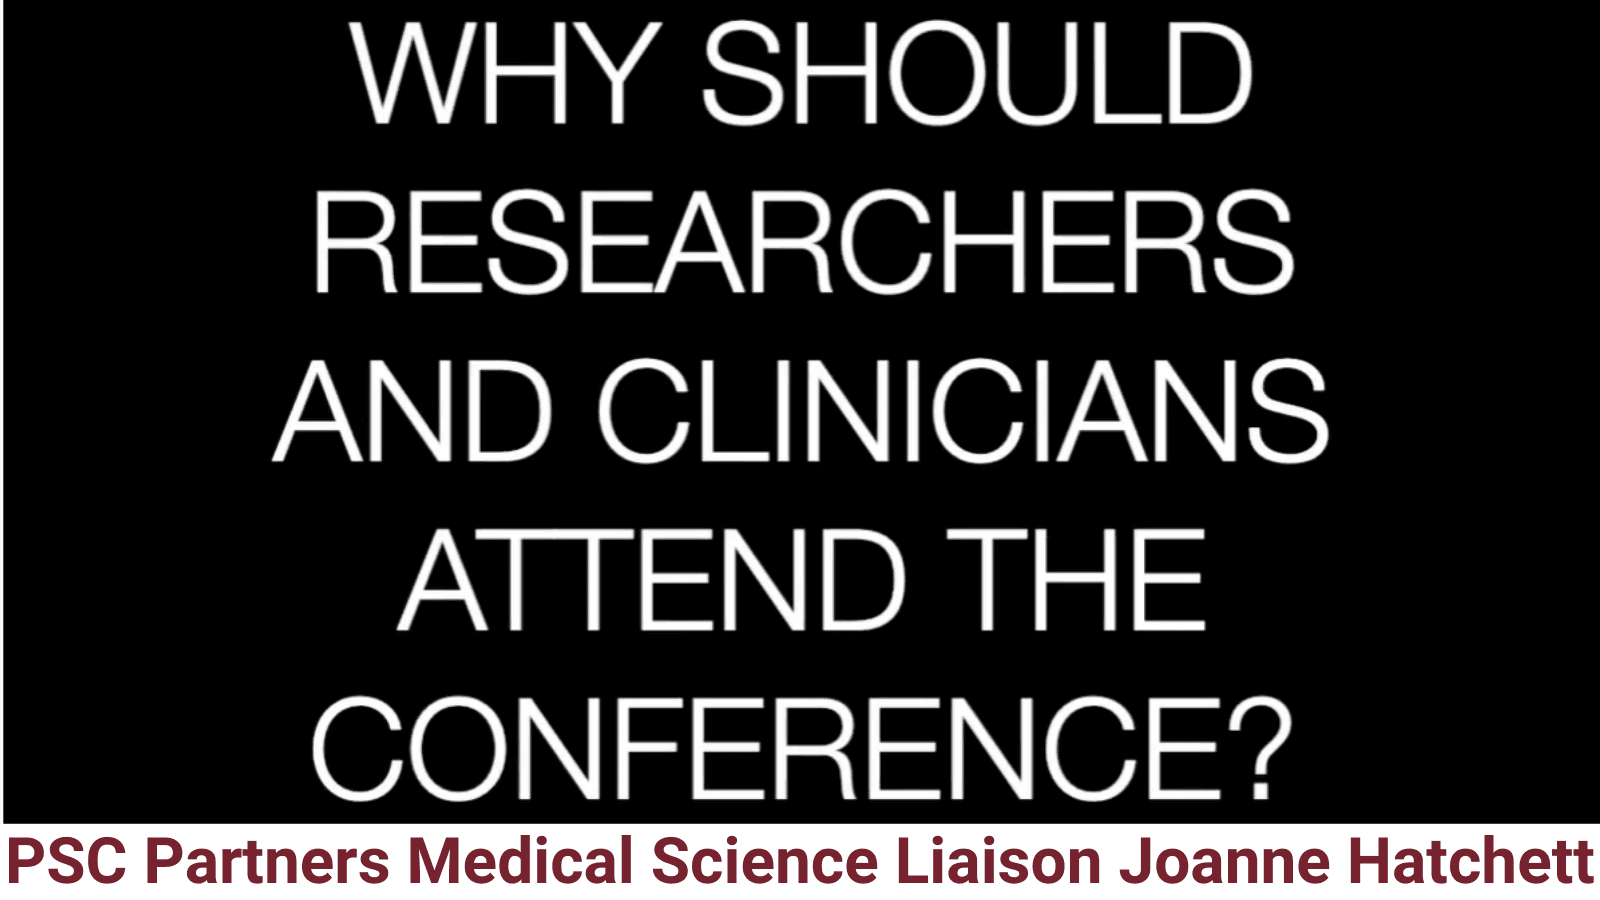 Why should researchers and clinicians attend the Conference?